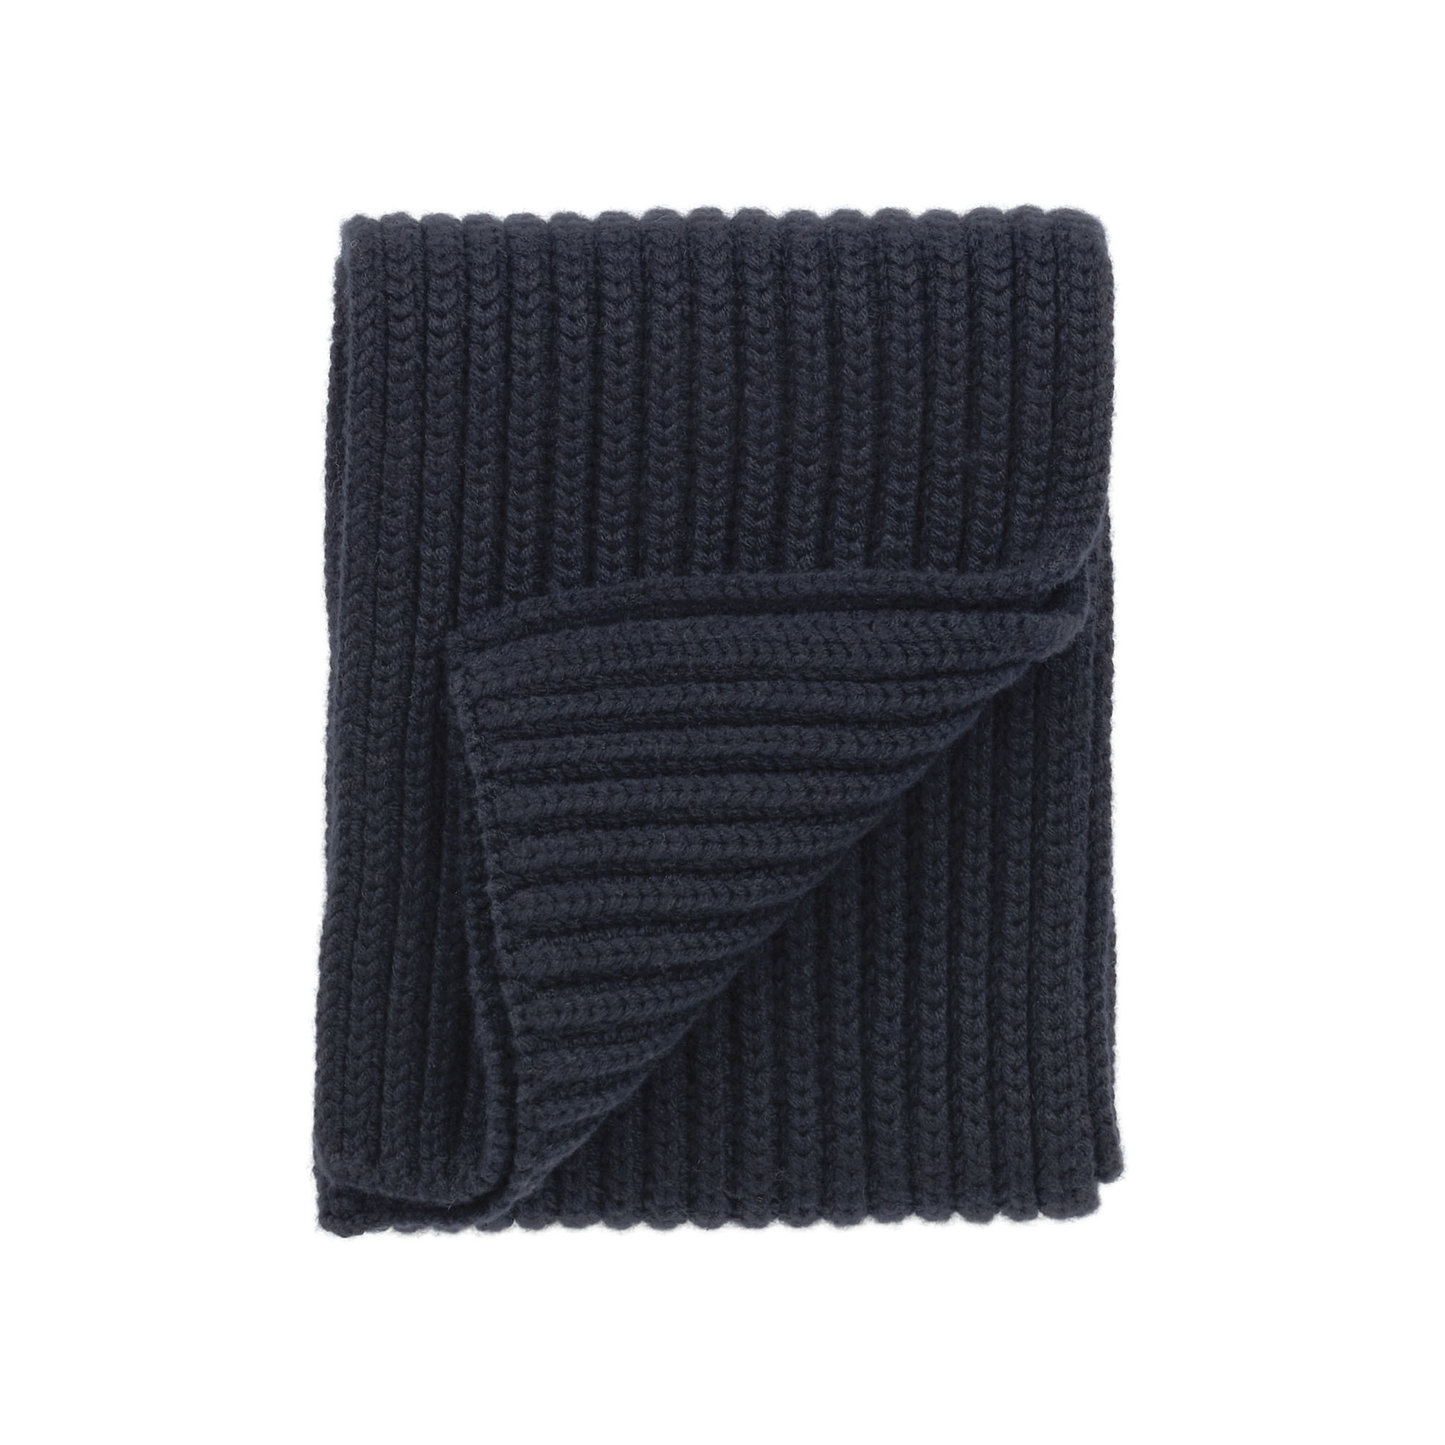 Loro Piana Ribbed Knitted Cashmere Scarf in Dark Blue - SARTALE